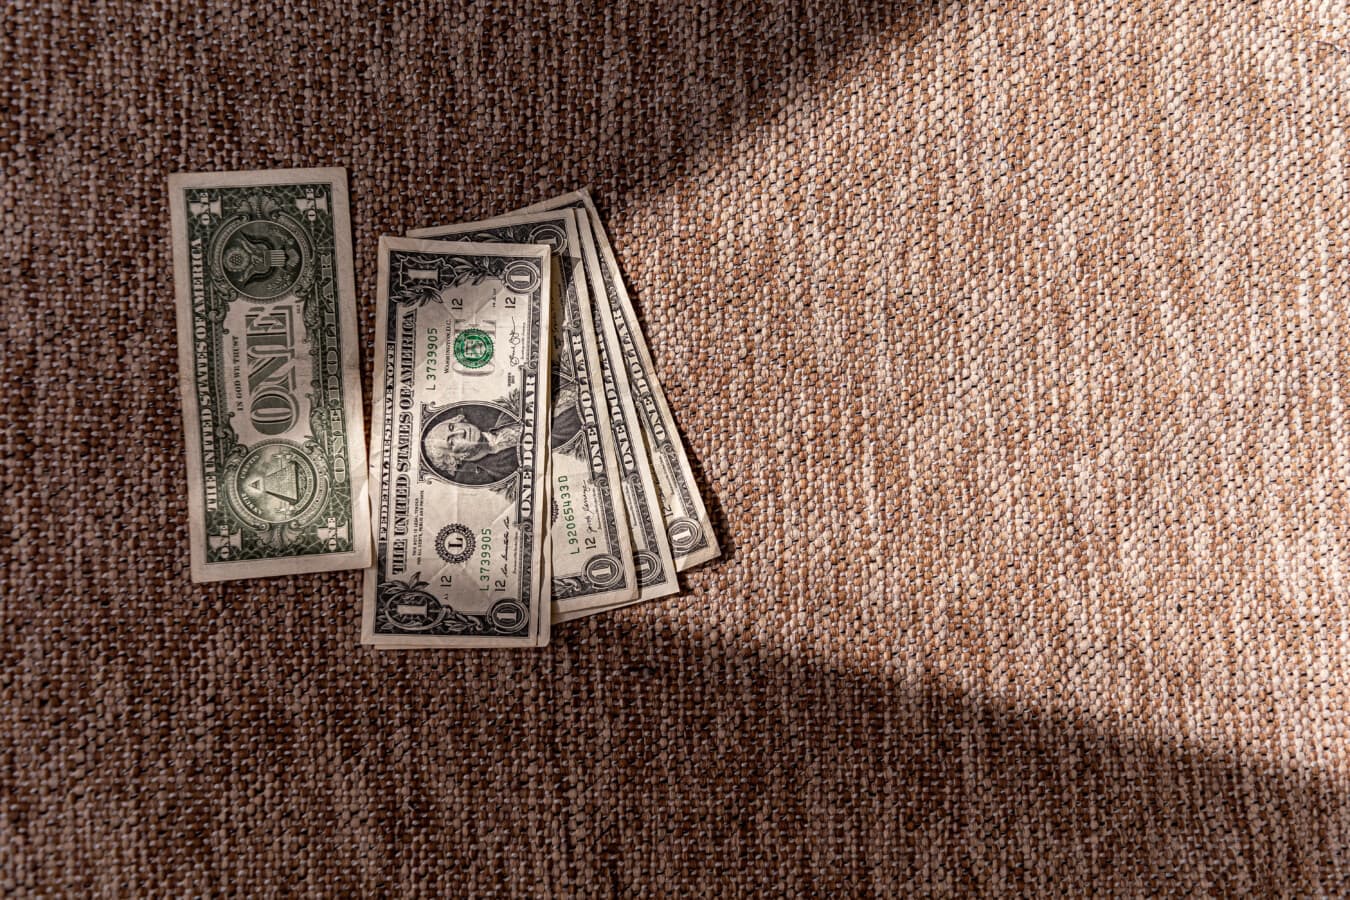 (1$) One dollar bill in shadow with light on pyramid